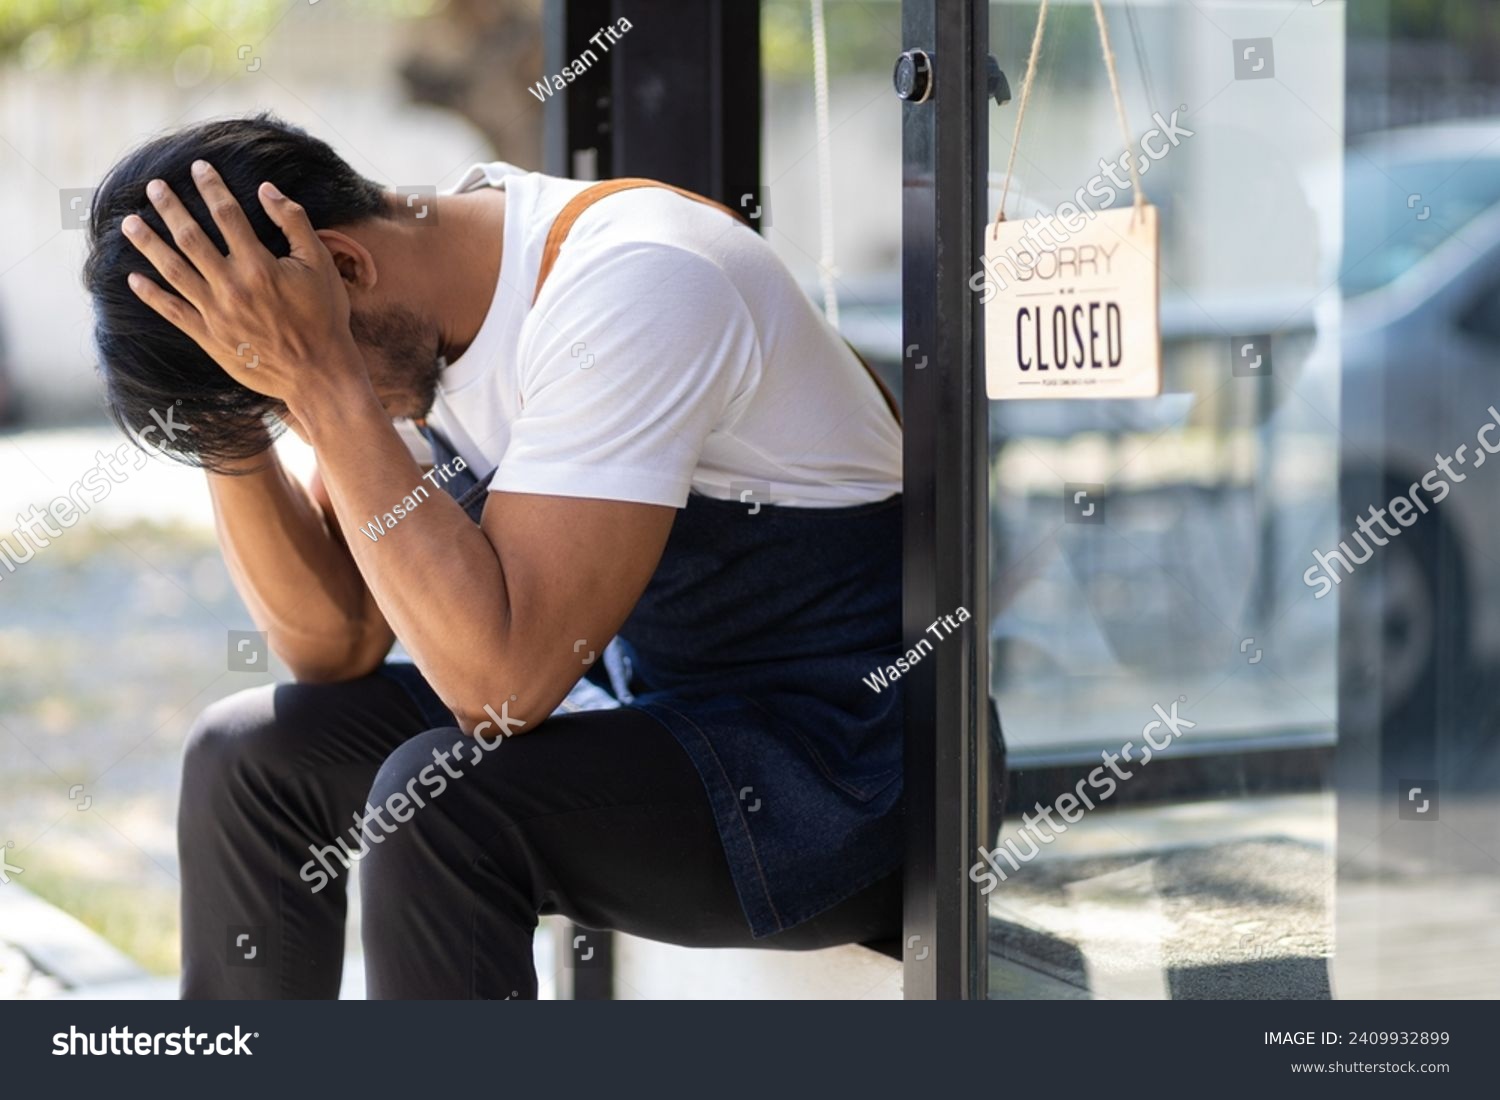 Young man running a small start-up business sits at the entrance looking absent-minded. Entrepreneurs starting small startups are stressed out and forced to close shop due to the economic crisis. #2409932899